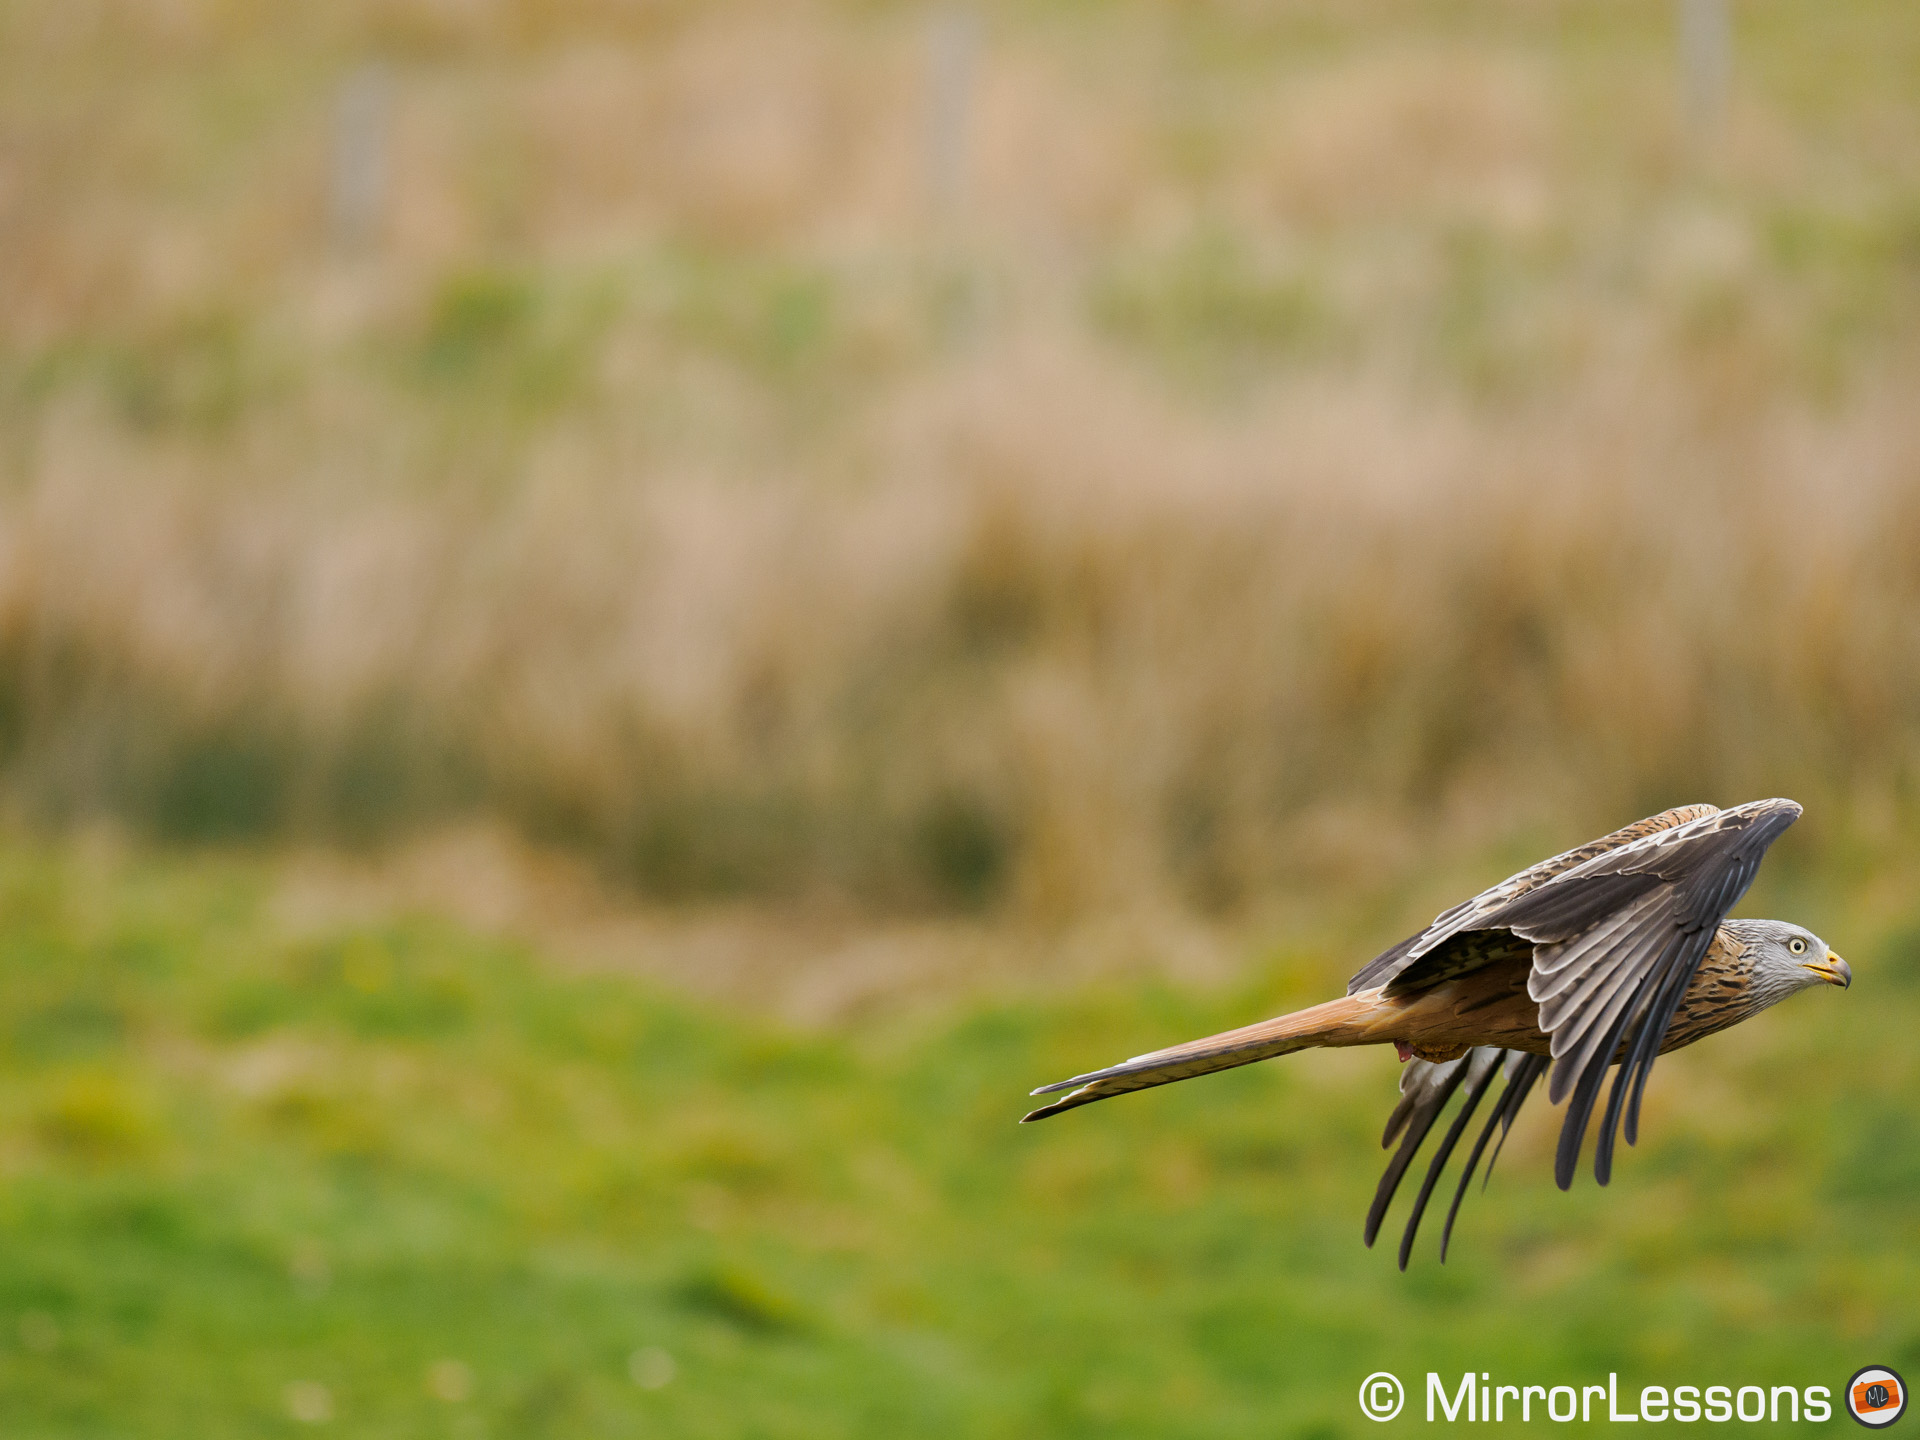 red kite flying, positioned at the bottom right of the frame rather than the centre